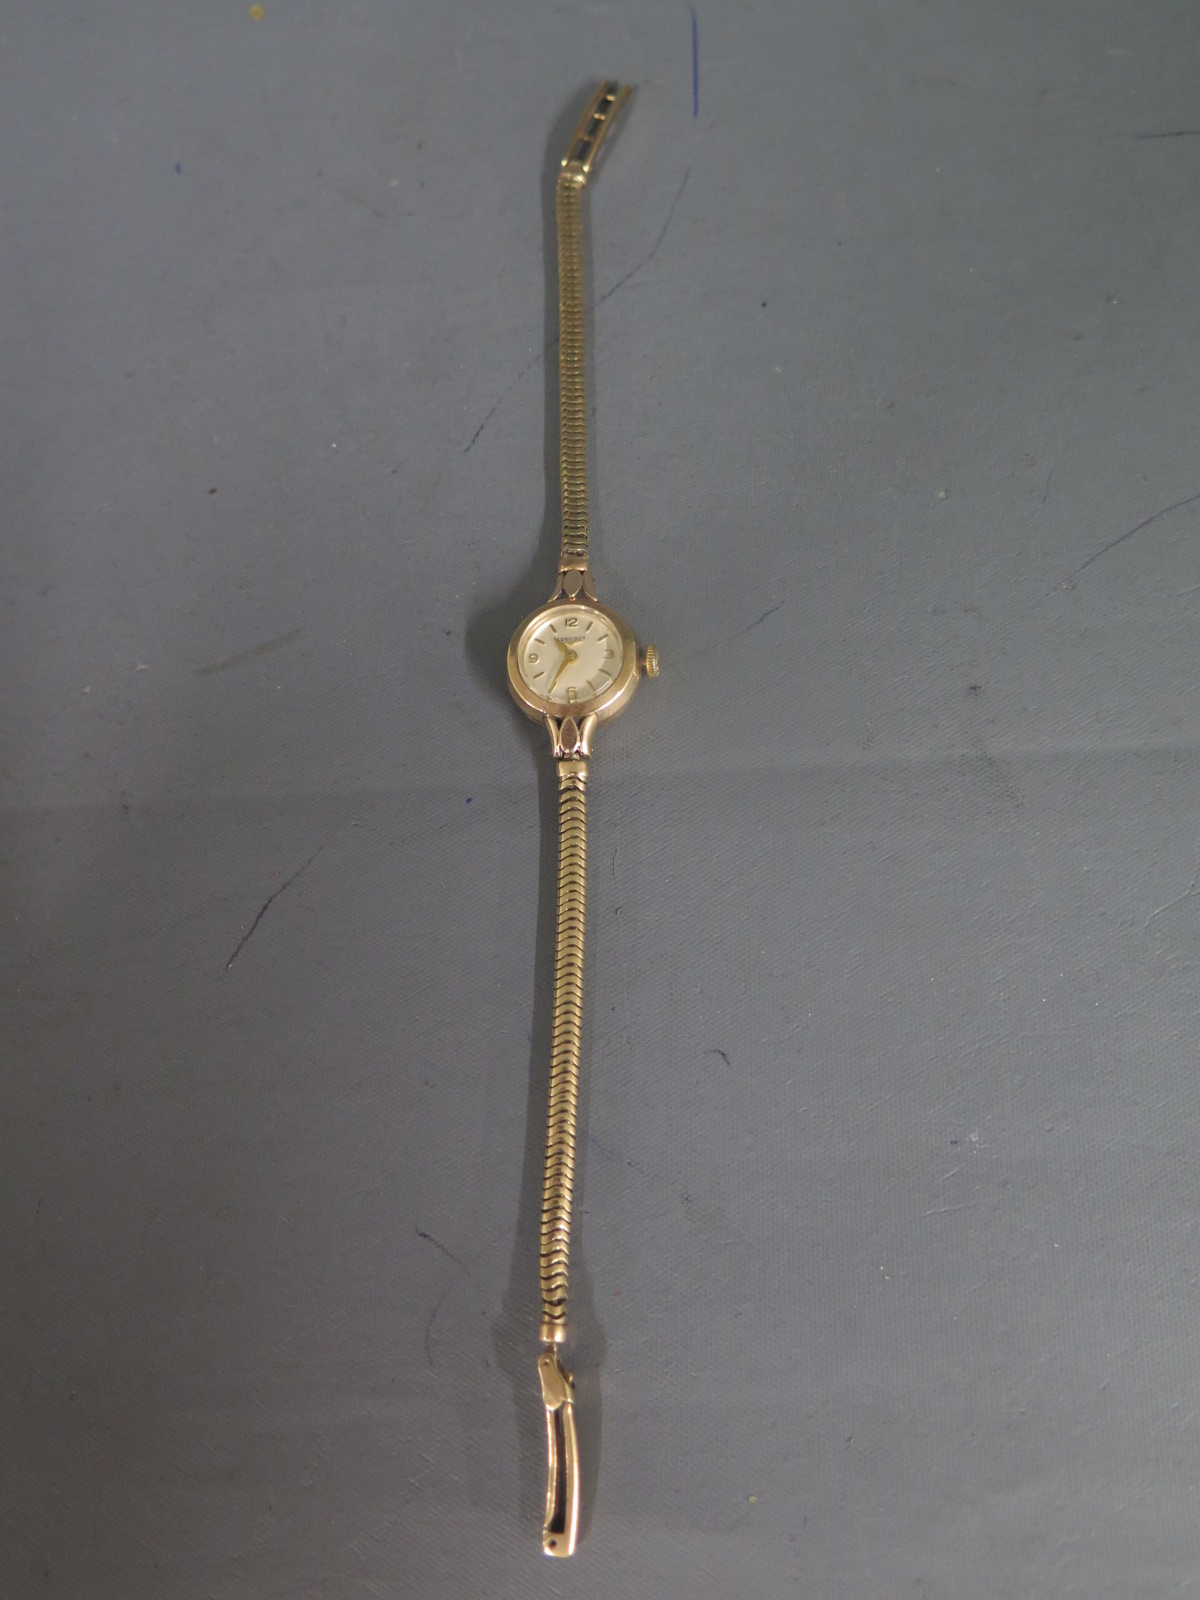 A ladies 9ct gold Longines wristwatch with bracelet hallmarked for 1960 with 17 jewel movement